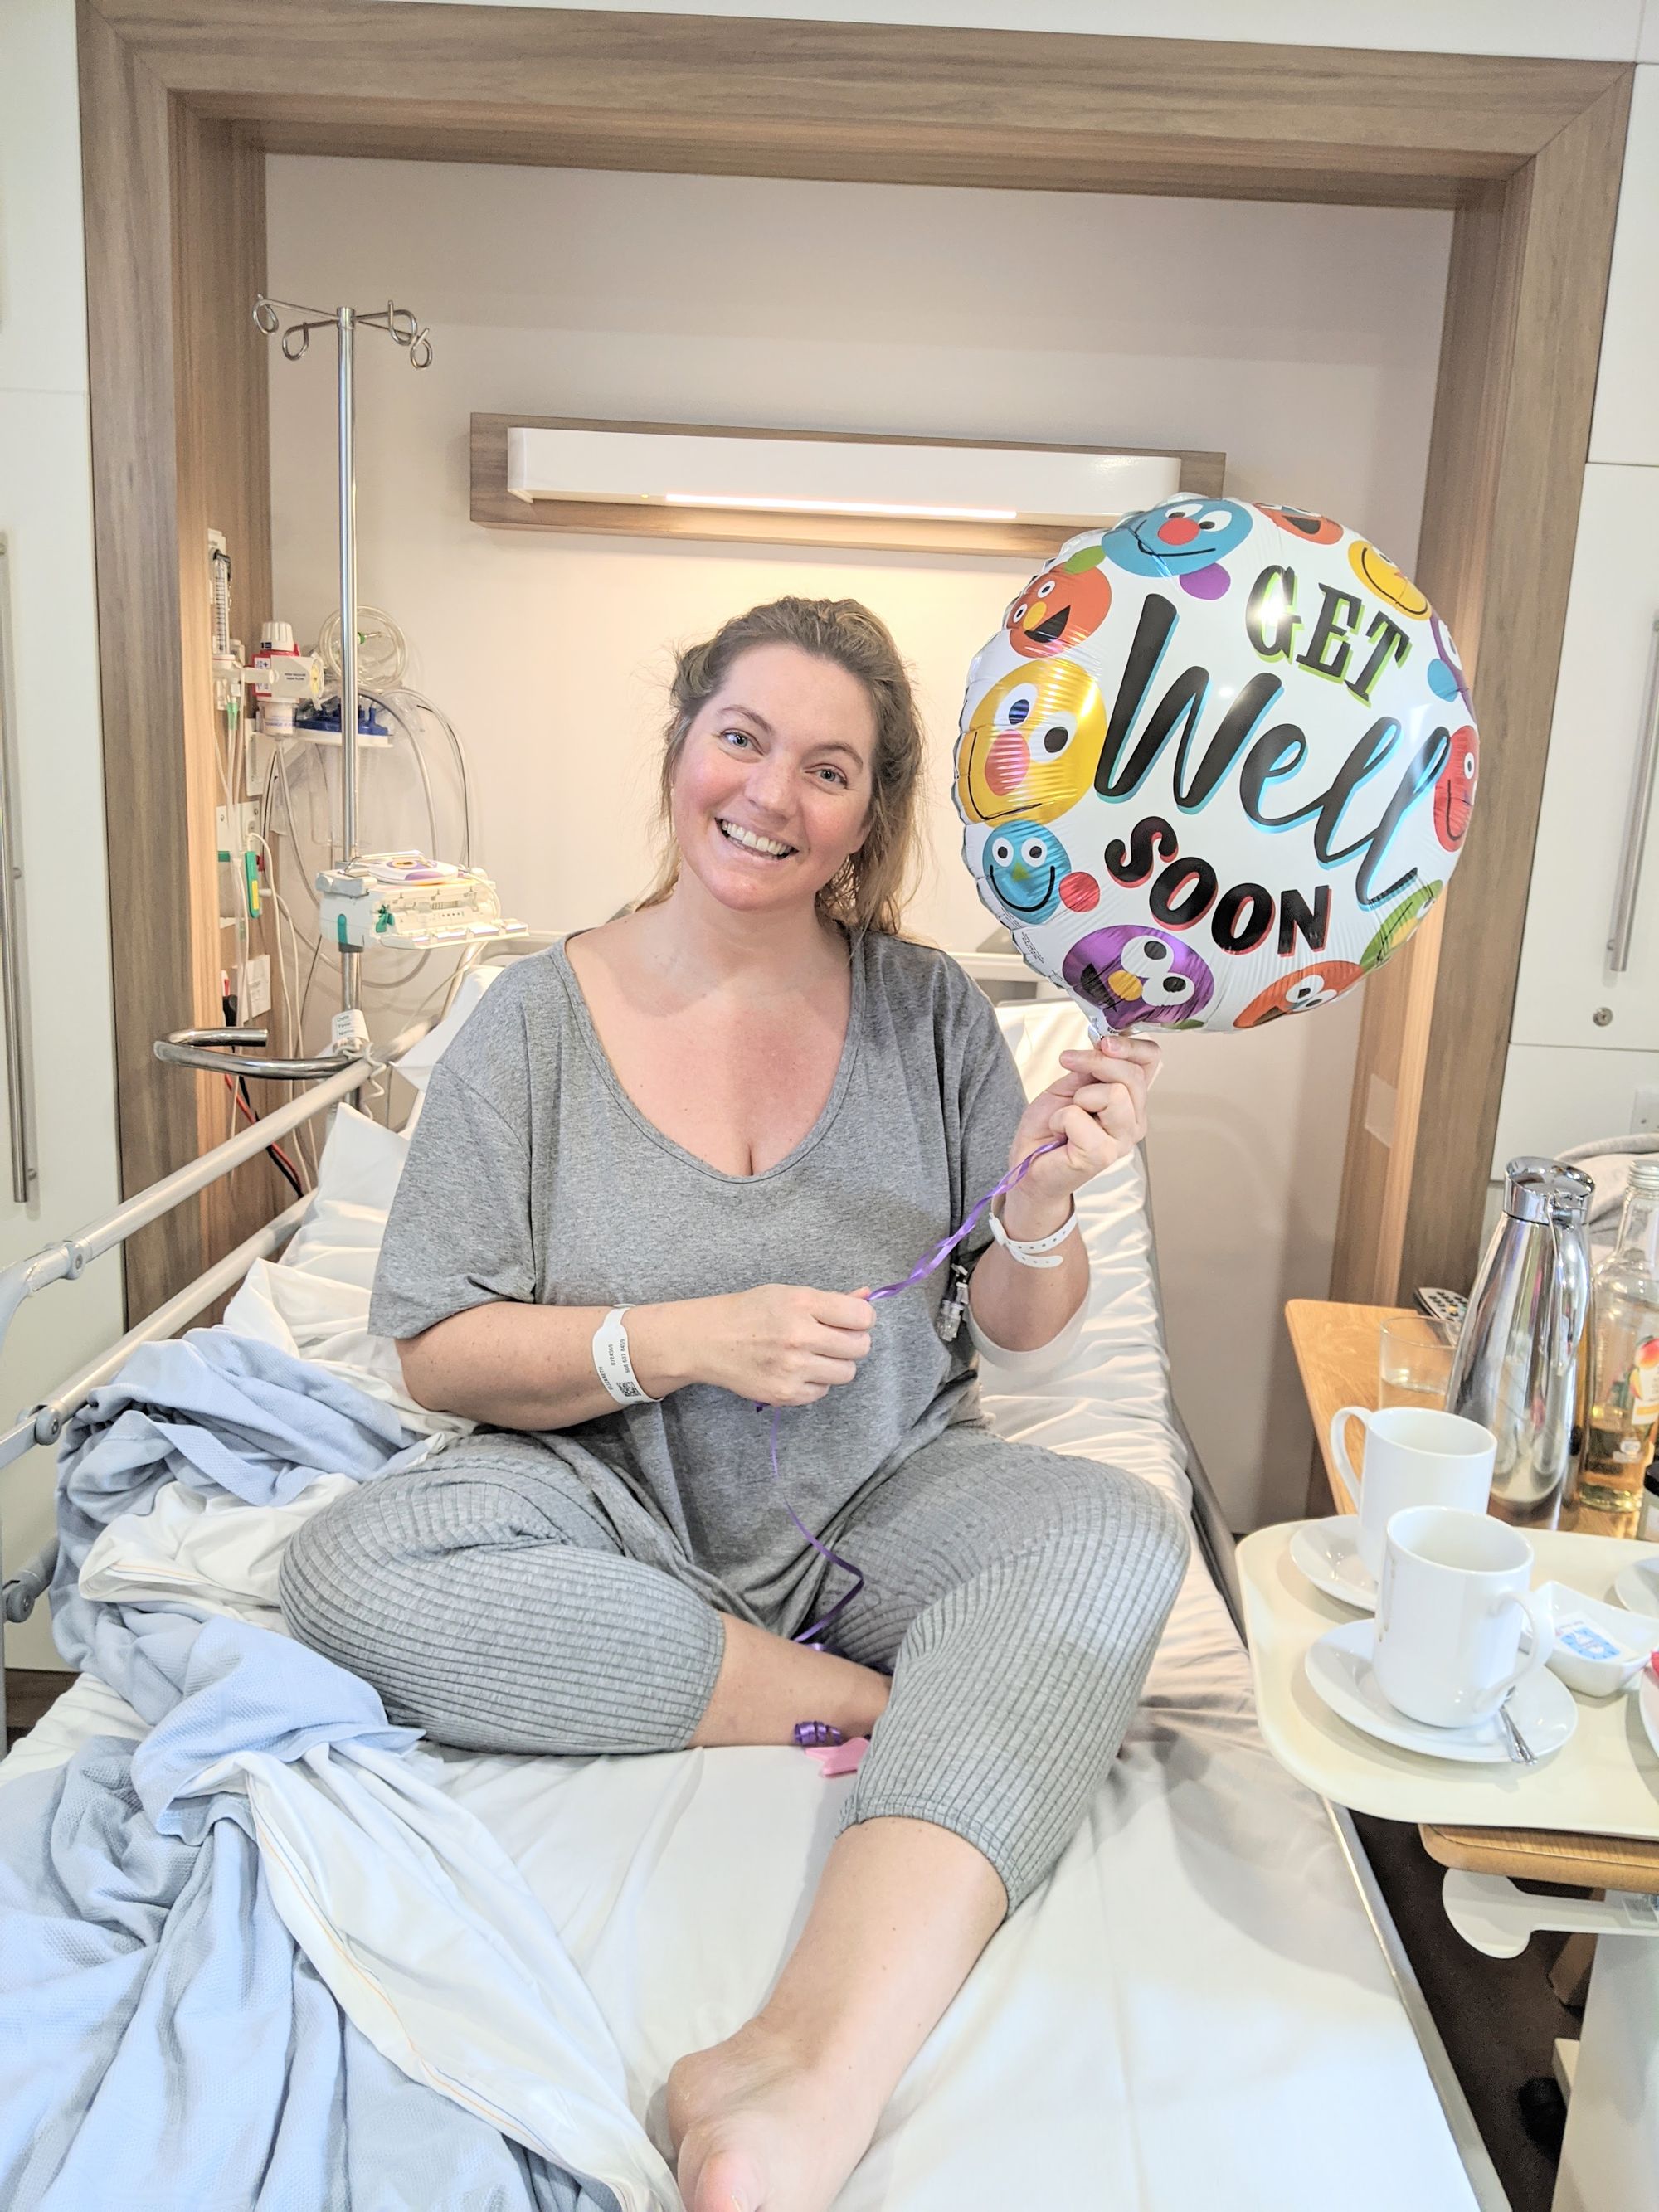 Beth in hospital smiling and holding a "Get well soon" balloon